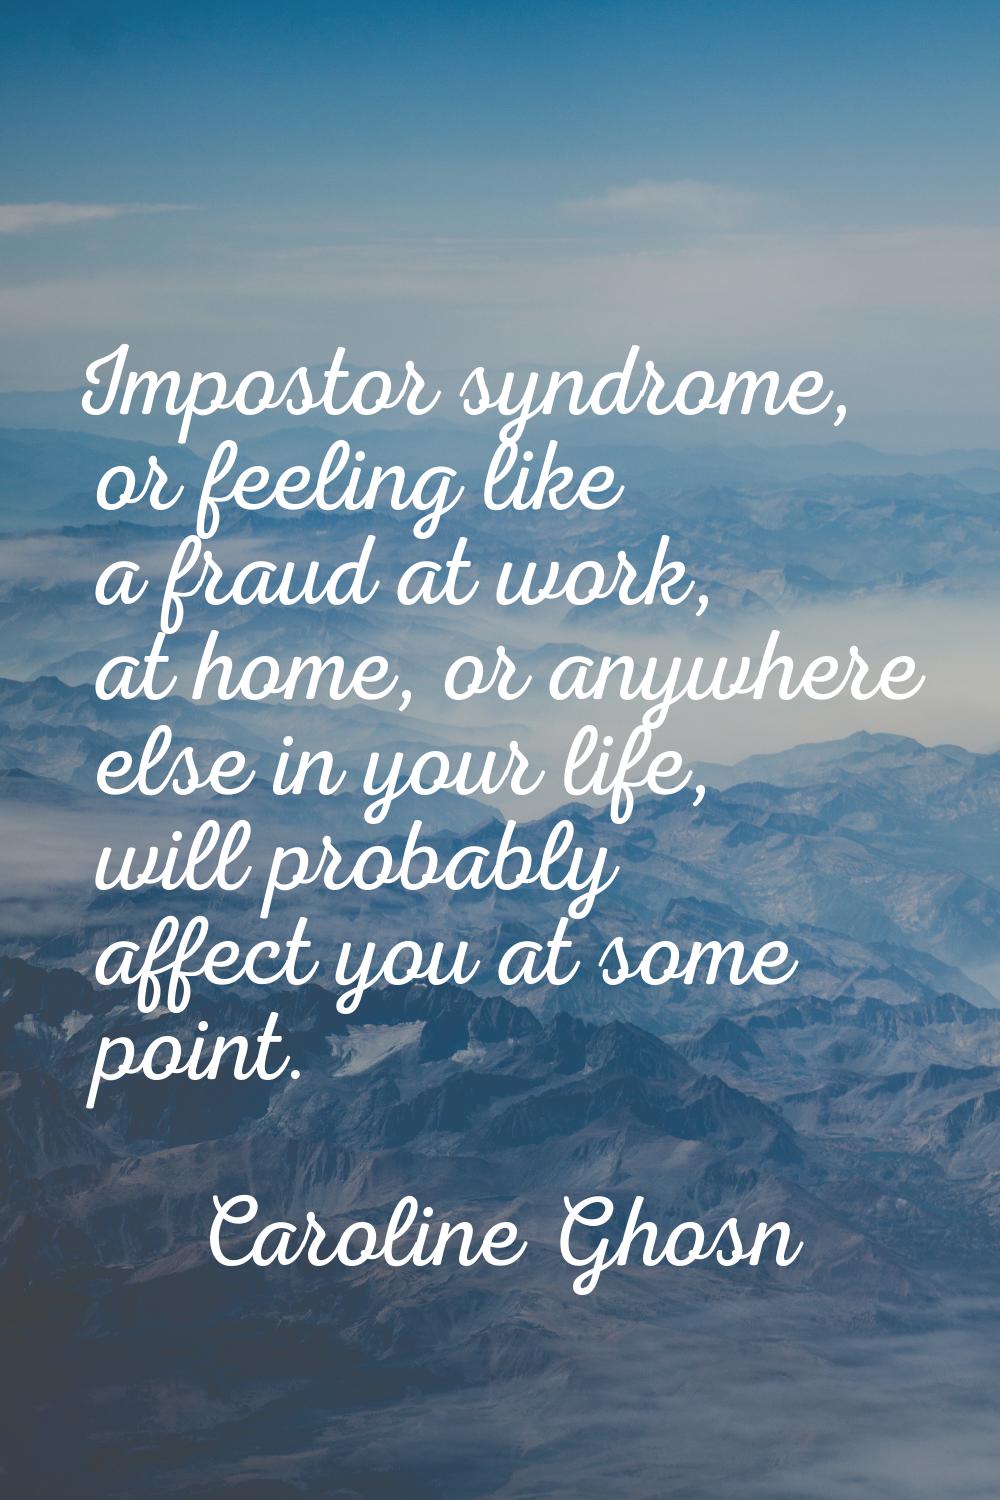 Impostor syndrome, or feeling like a fraud at work, at home, or anywhere else in your life, will pr